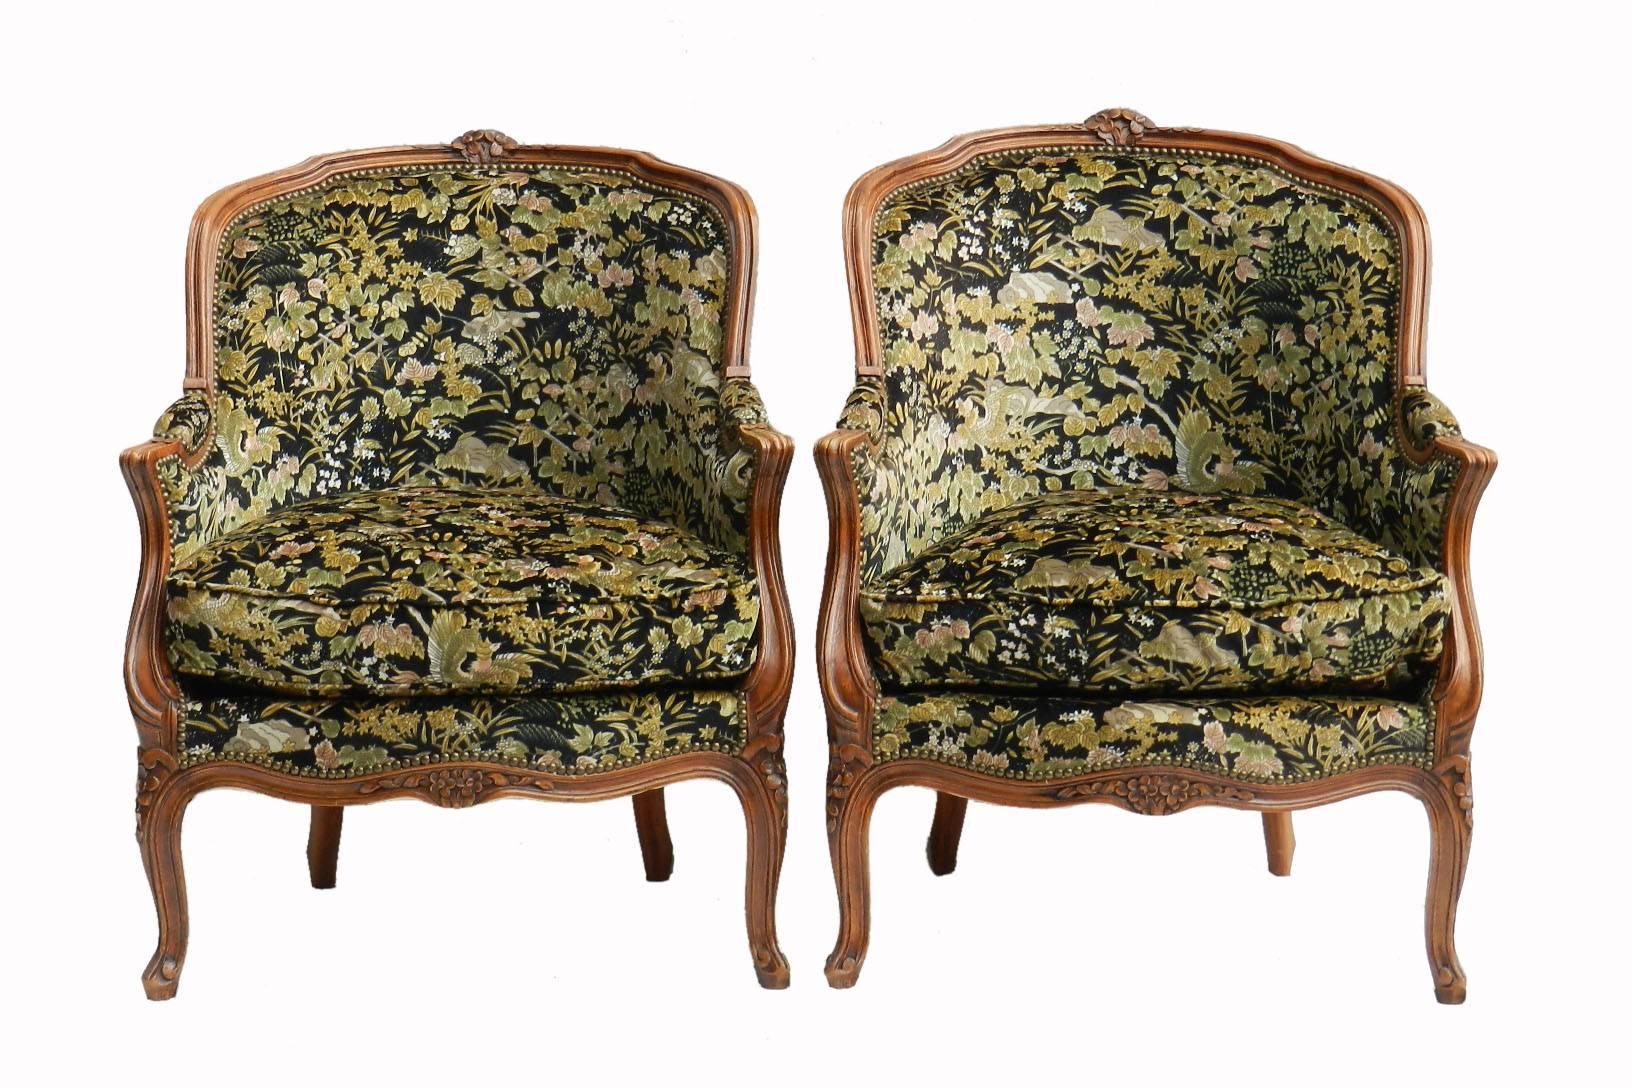 Pair of French armchairs and ottoman stool Louis revival early 20th century c1920
To recover
Louis XV revival
Upholstered Chinoiserie top covers easily changed to suit your interior
Tub slipper chairs
Feather filled cushions
Very confortable